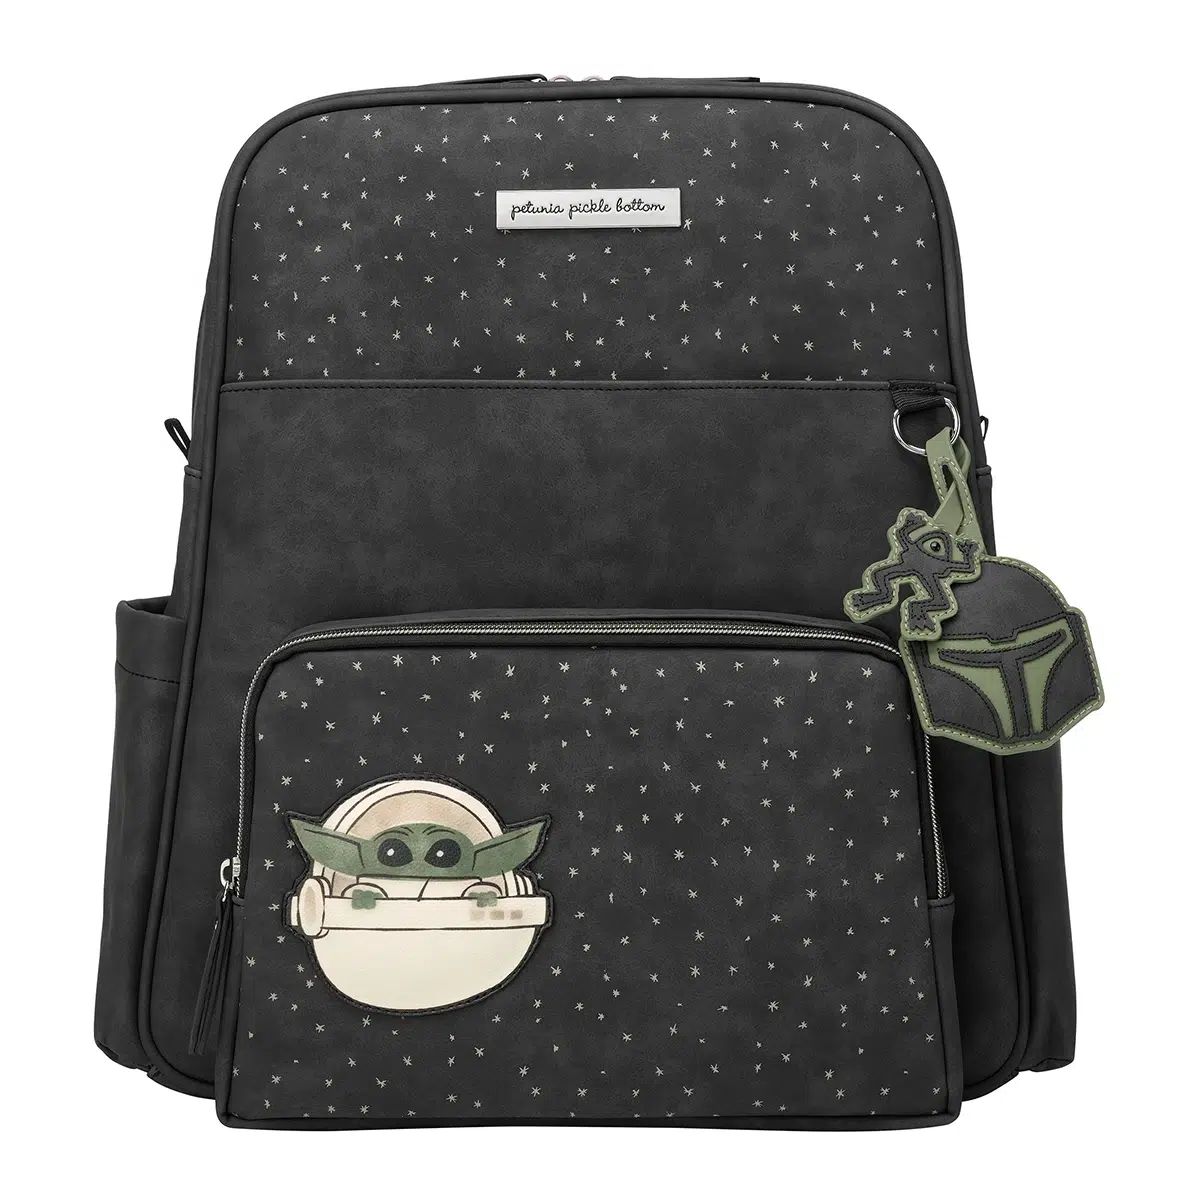 Sync Backpack in The Child | Petunia Pickle Bottom